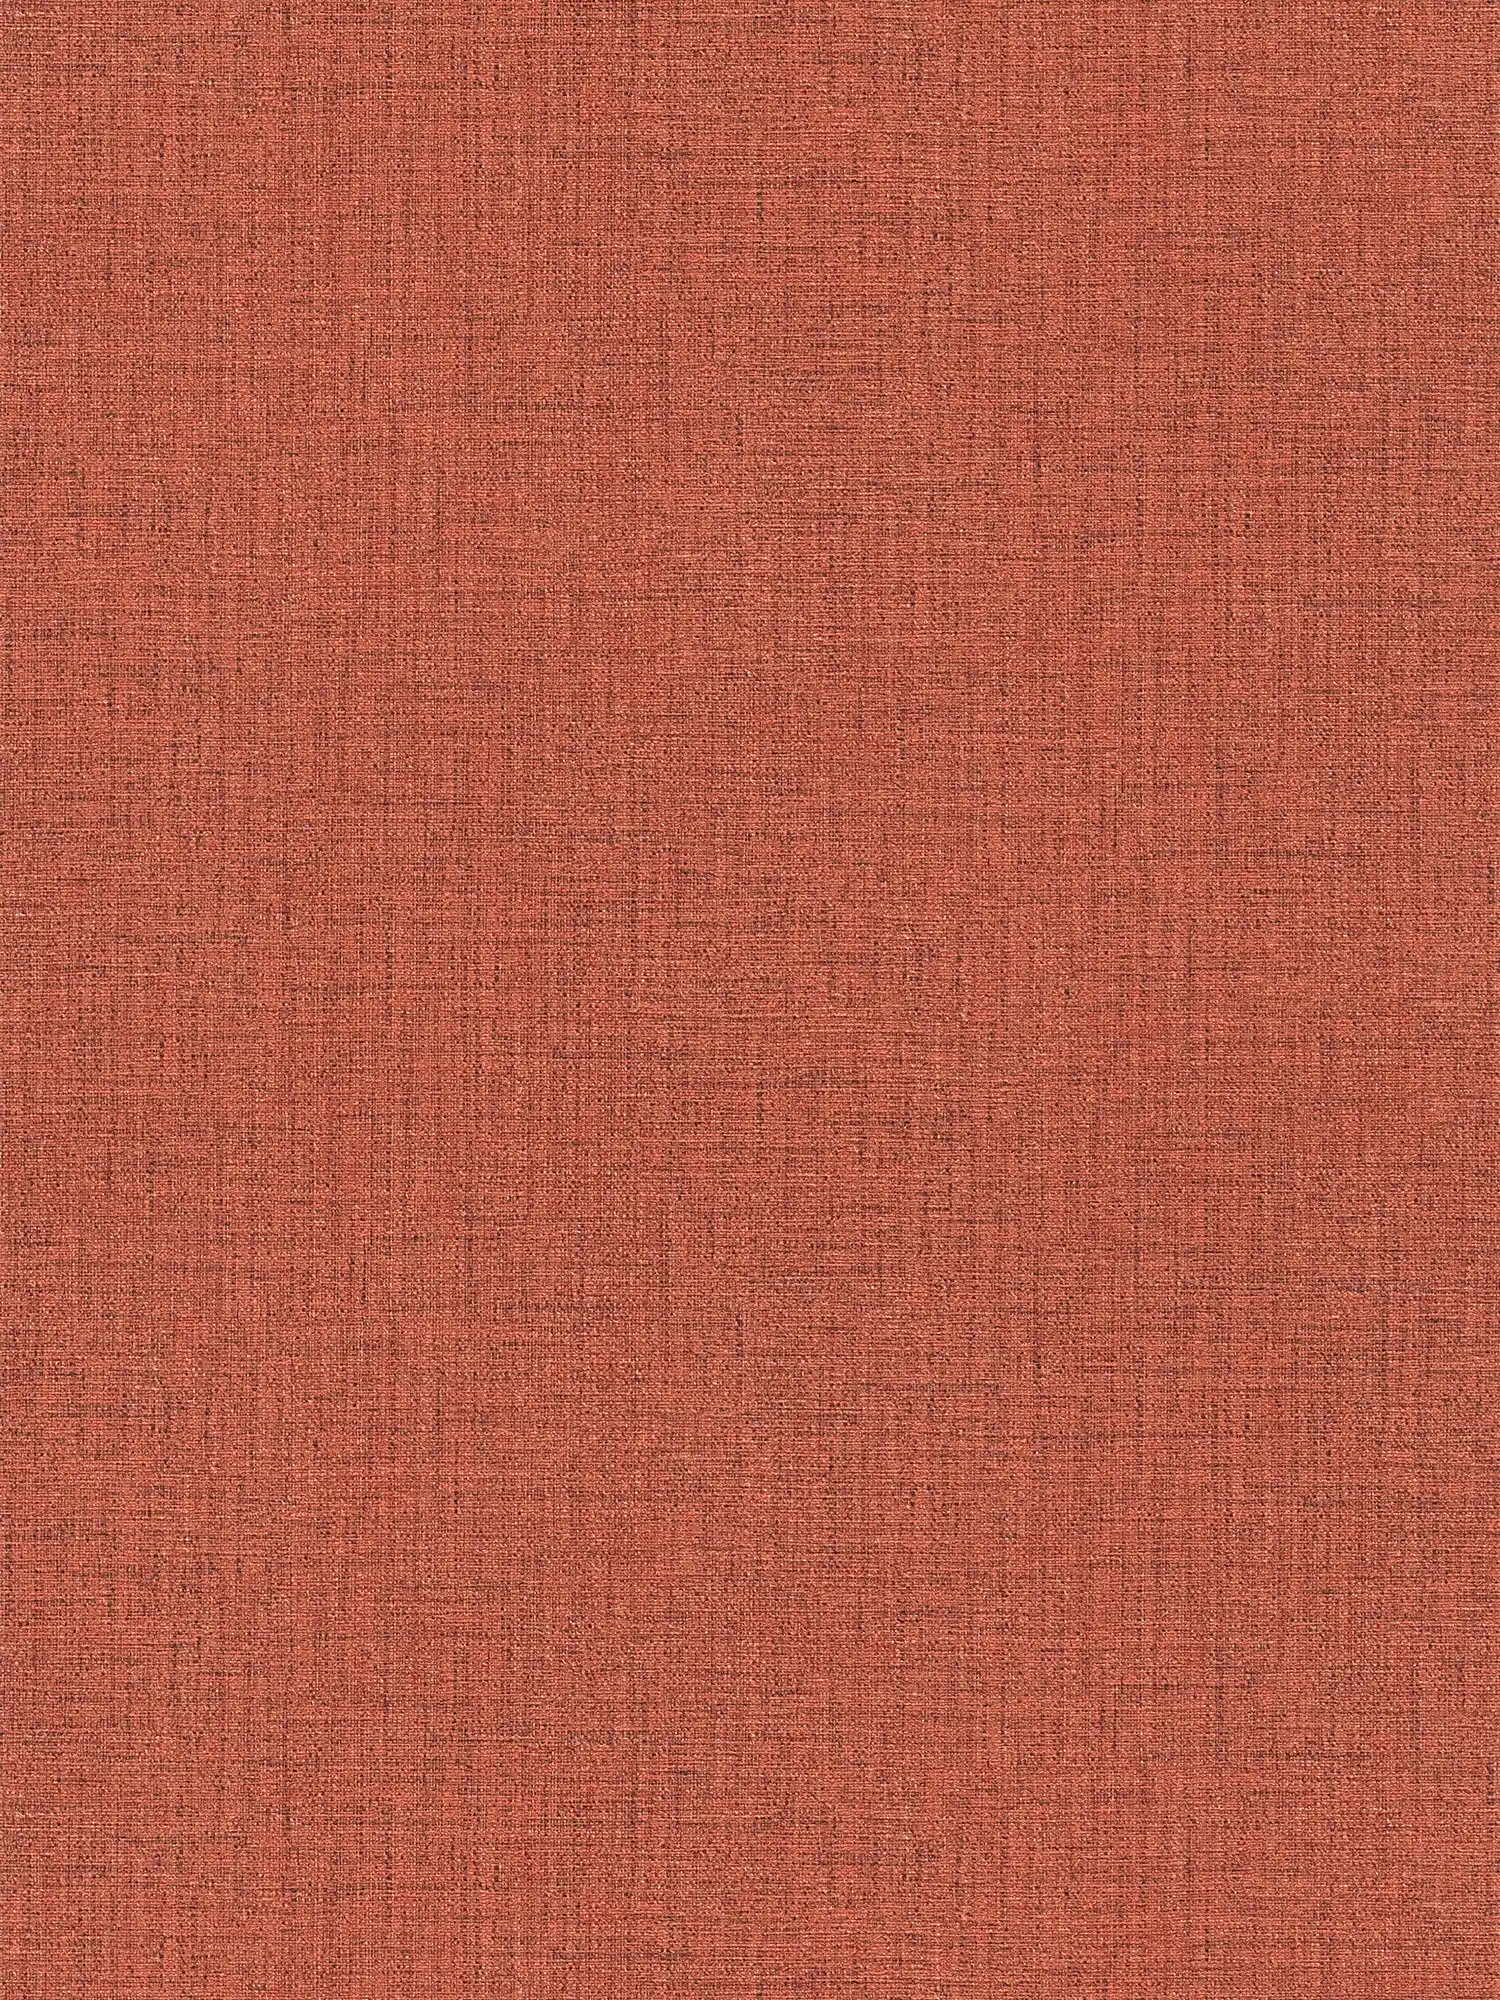 Non-woven wallpaper red with textile optics & structure design
